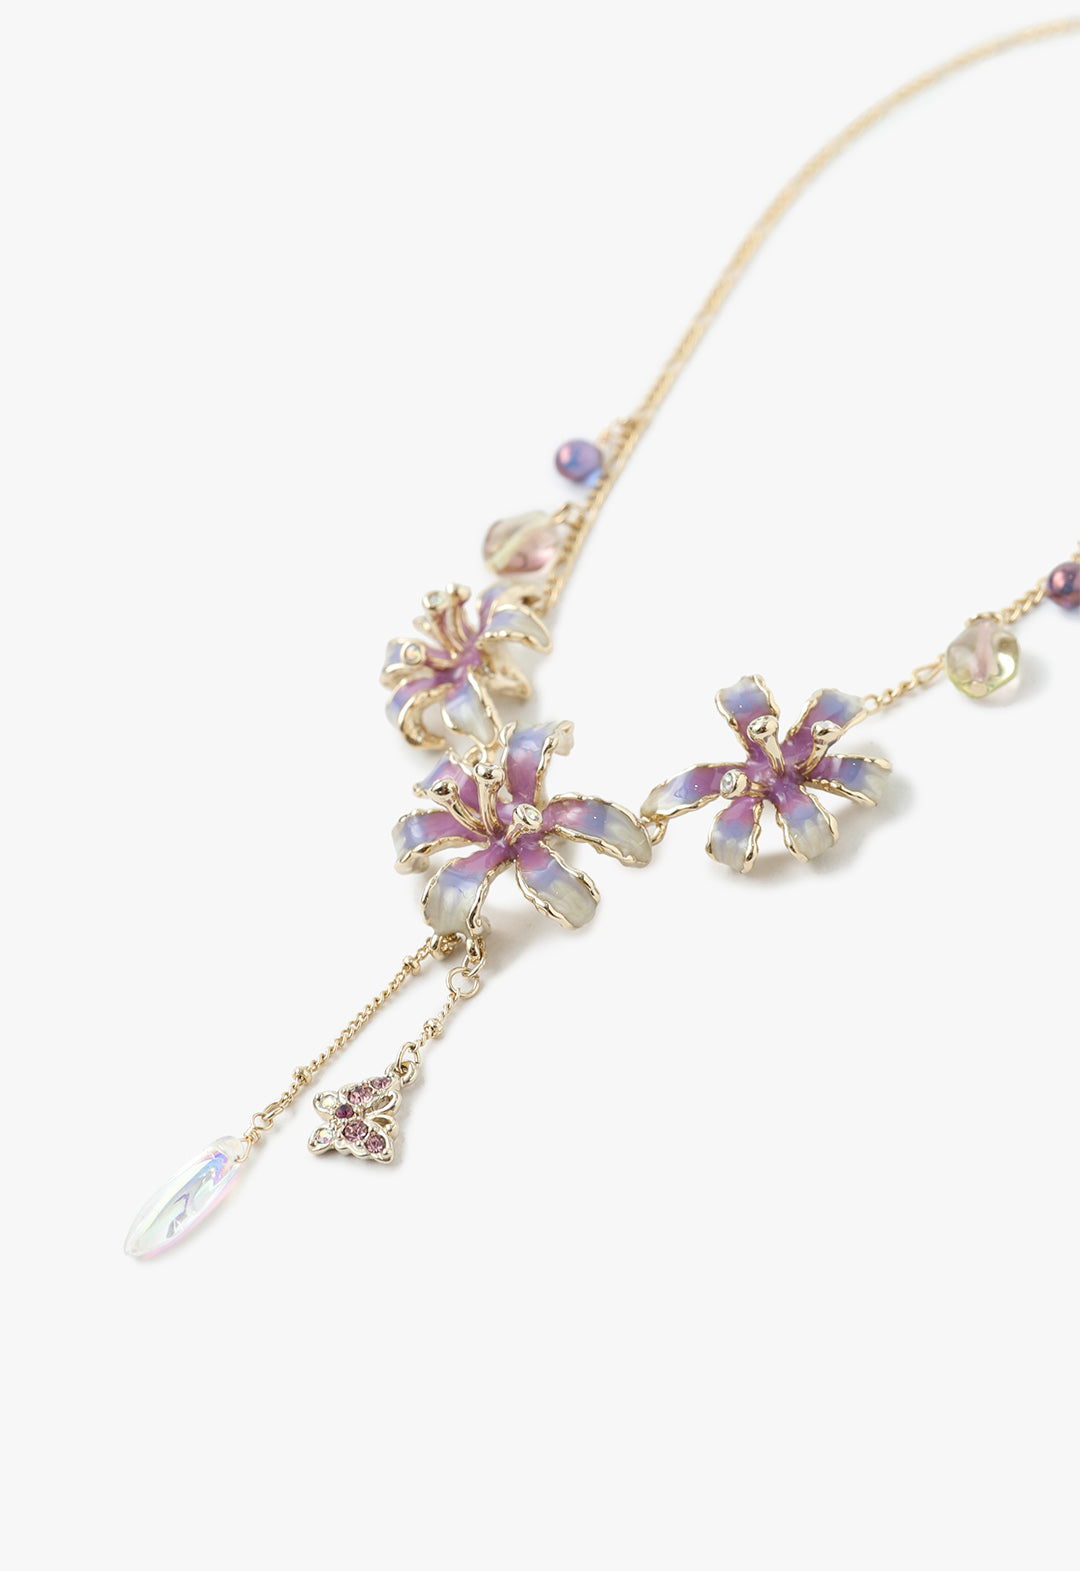 Floral Necklace Purple, also, 2 blue beads and 2 transparent, above the flowers, on a golden chain 